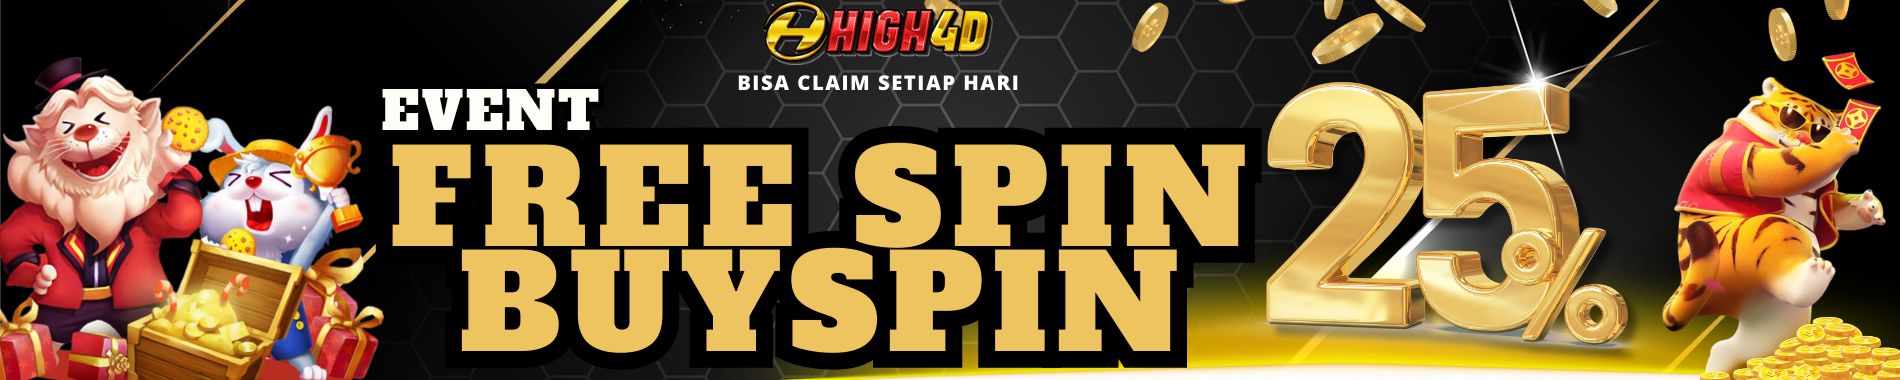 EVENT FREESPIN 